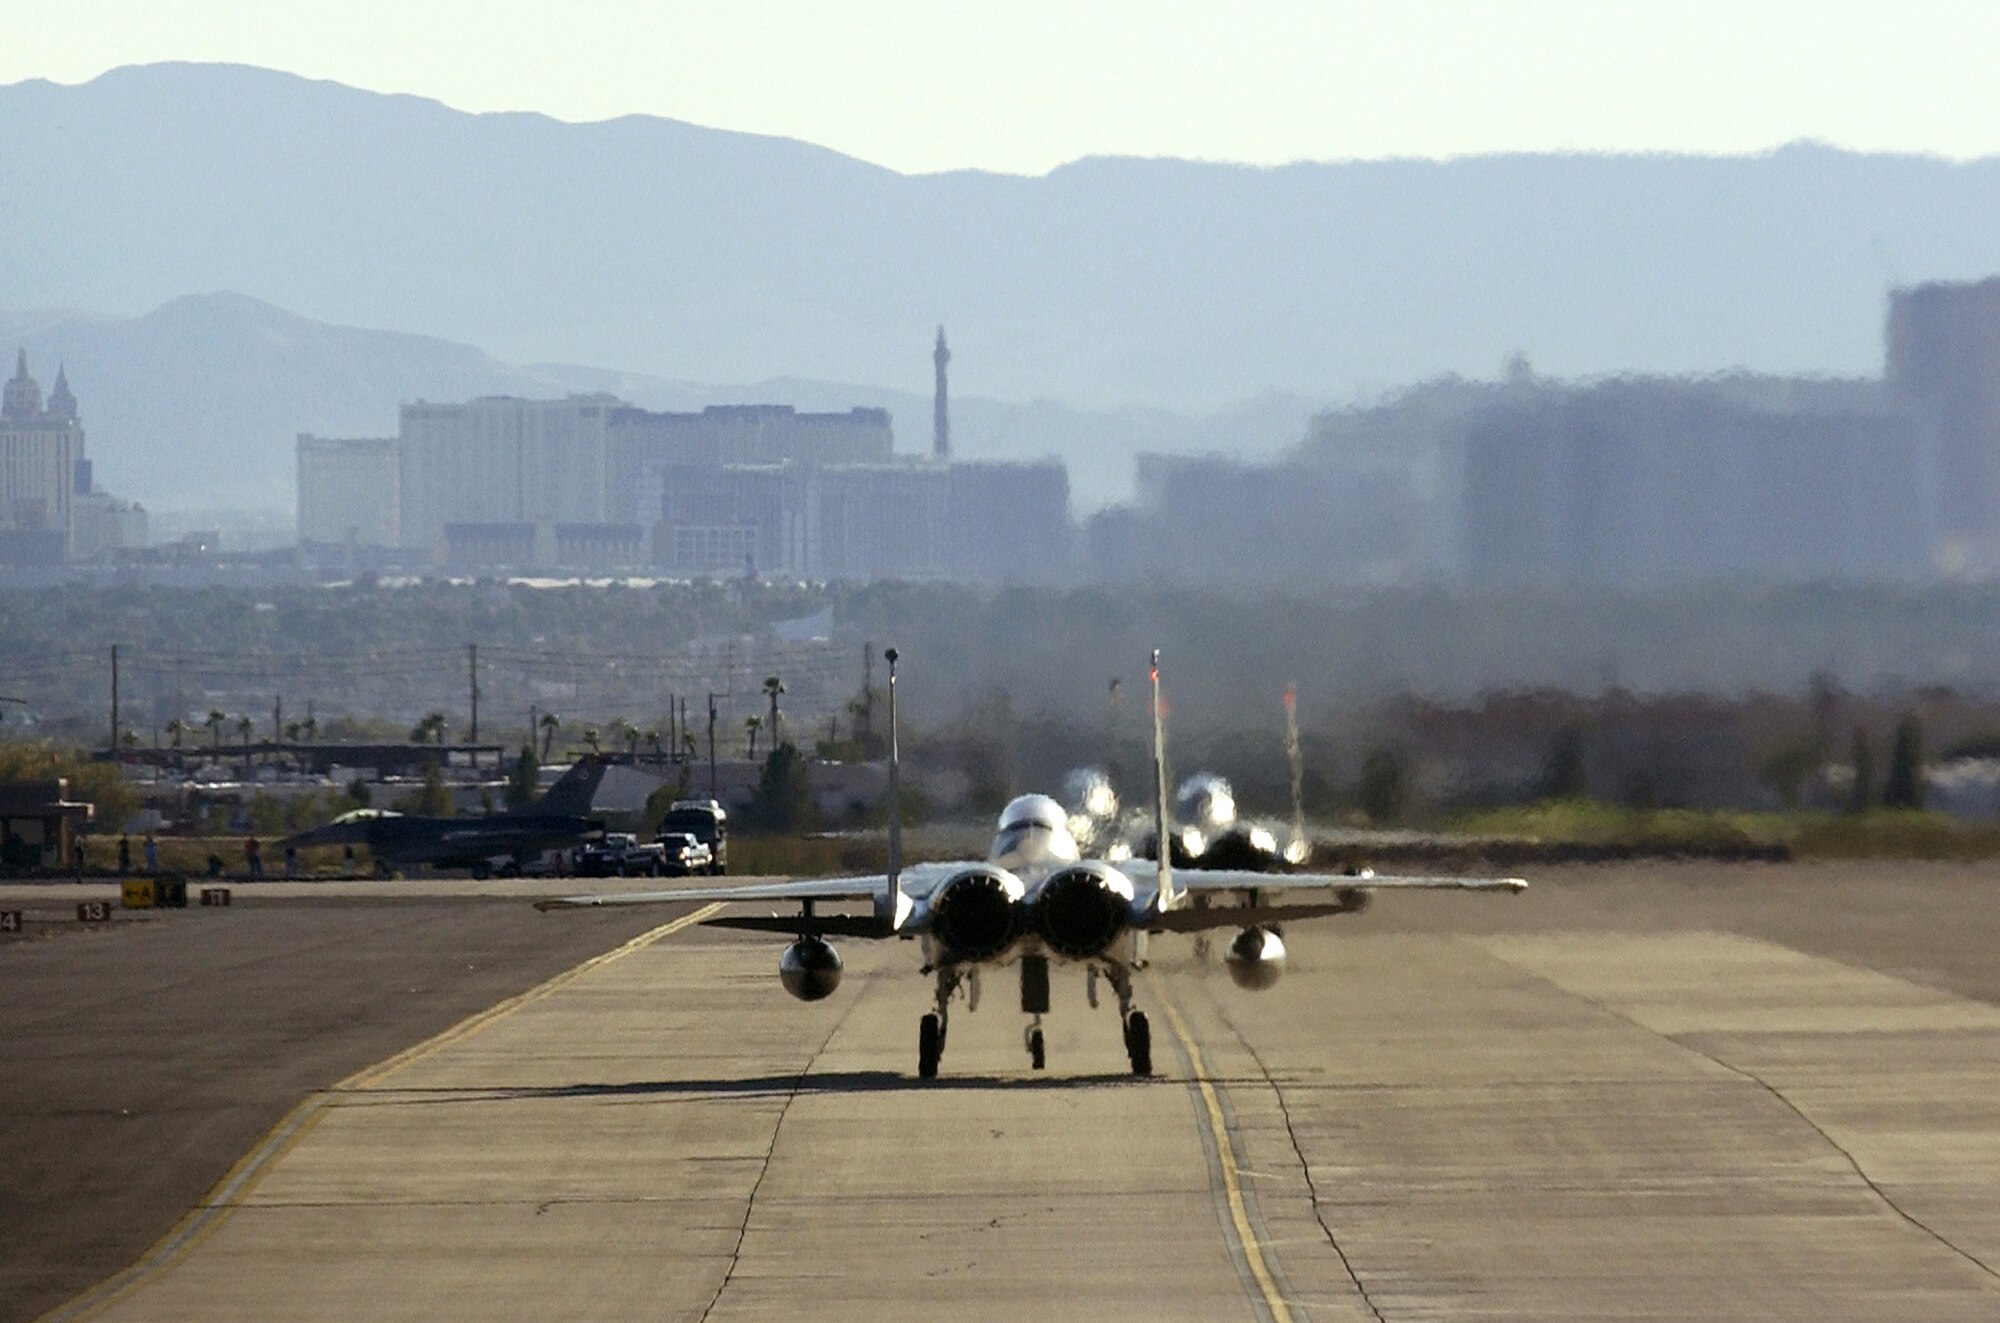 F-15 Eagles taxi out Oct. 19 during Red Flag 07-1 at Nellis Air Force Base, Nev. Red Flag tests aircrews' warfighting skills in realistic combat situations. (U.S. Air Force photo/Master Sgt. Kevin J. Gruenwald)




